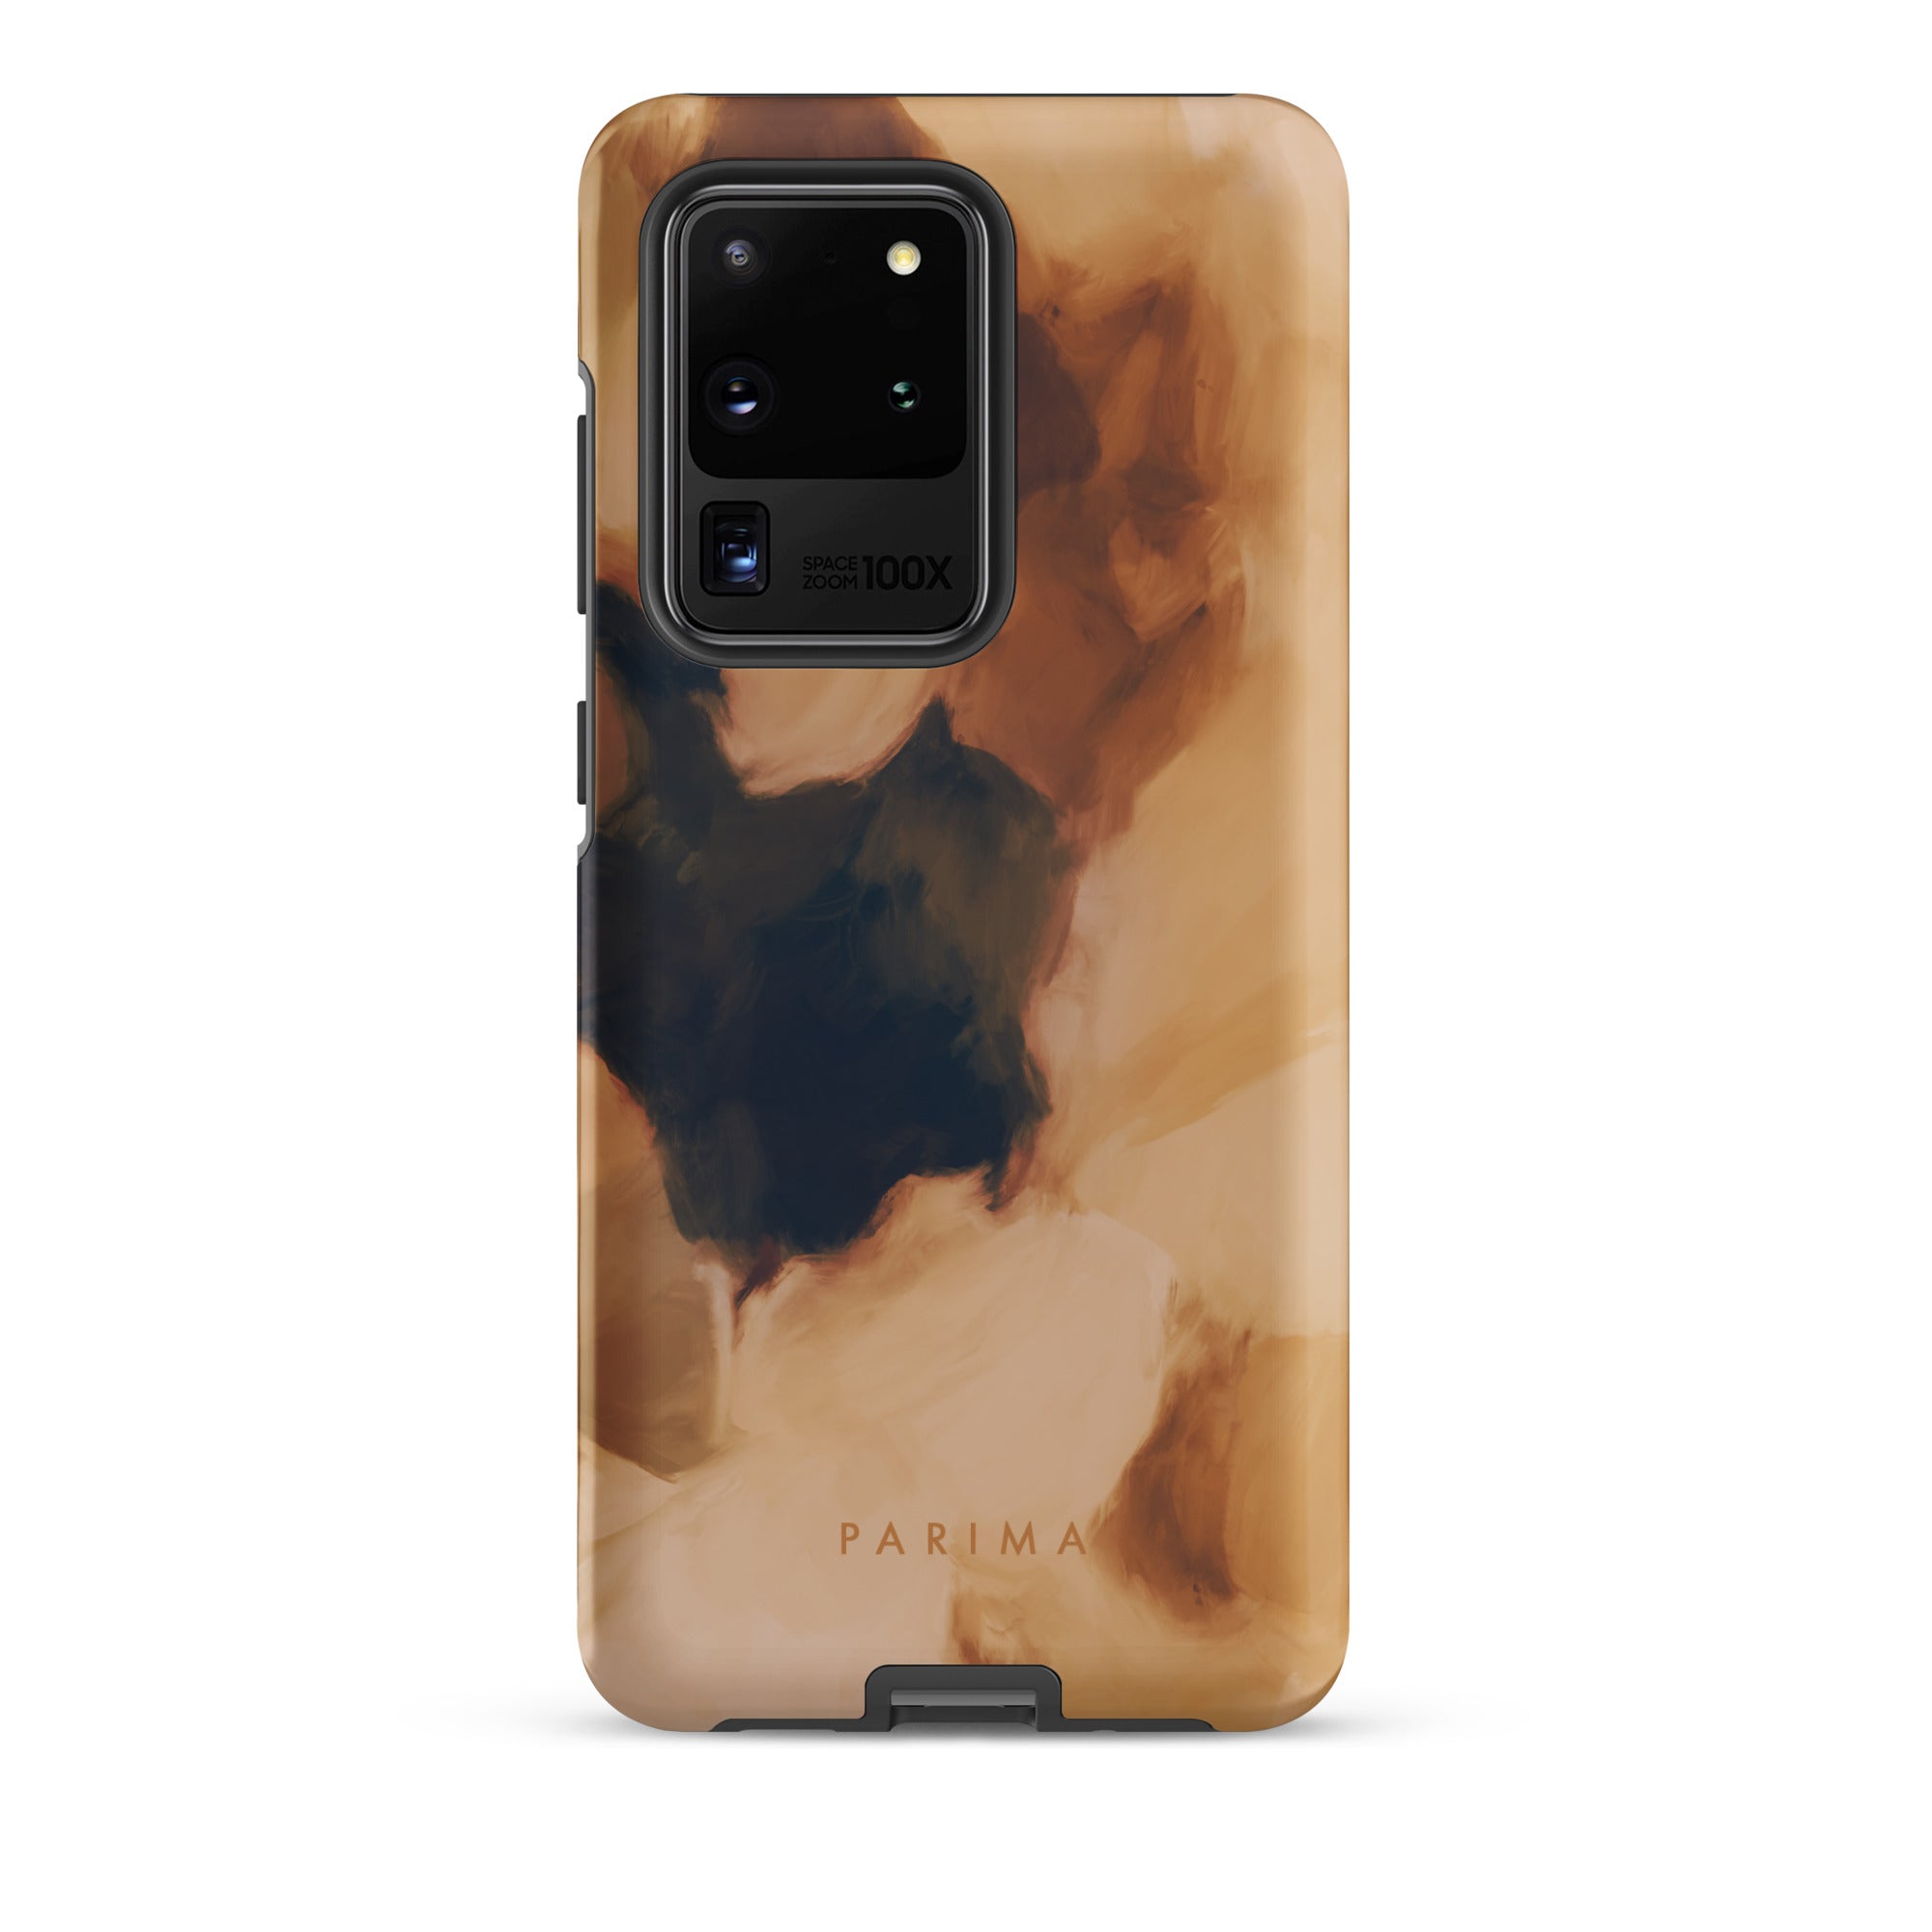 Clay, brown and tan color abstract art on Samsung Galaxy s20 Ultra tough case by Parima Studio